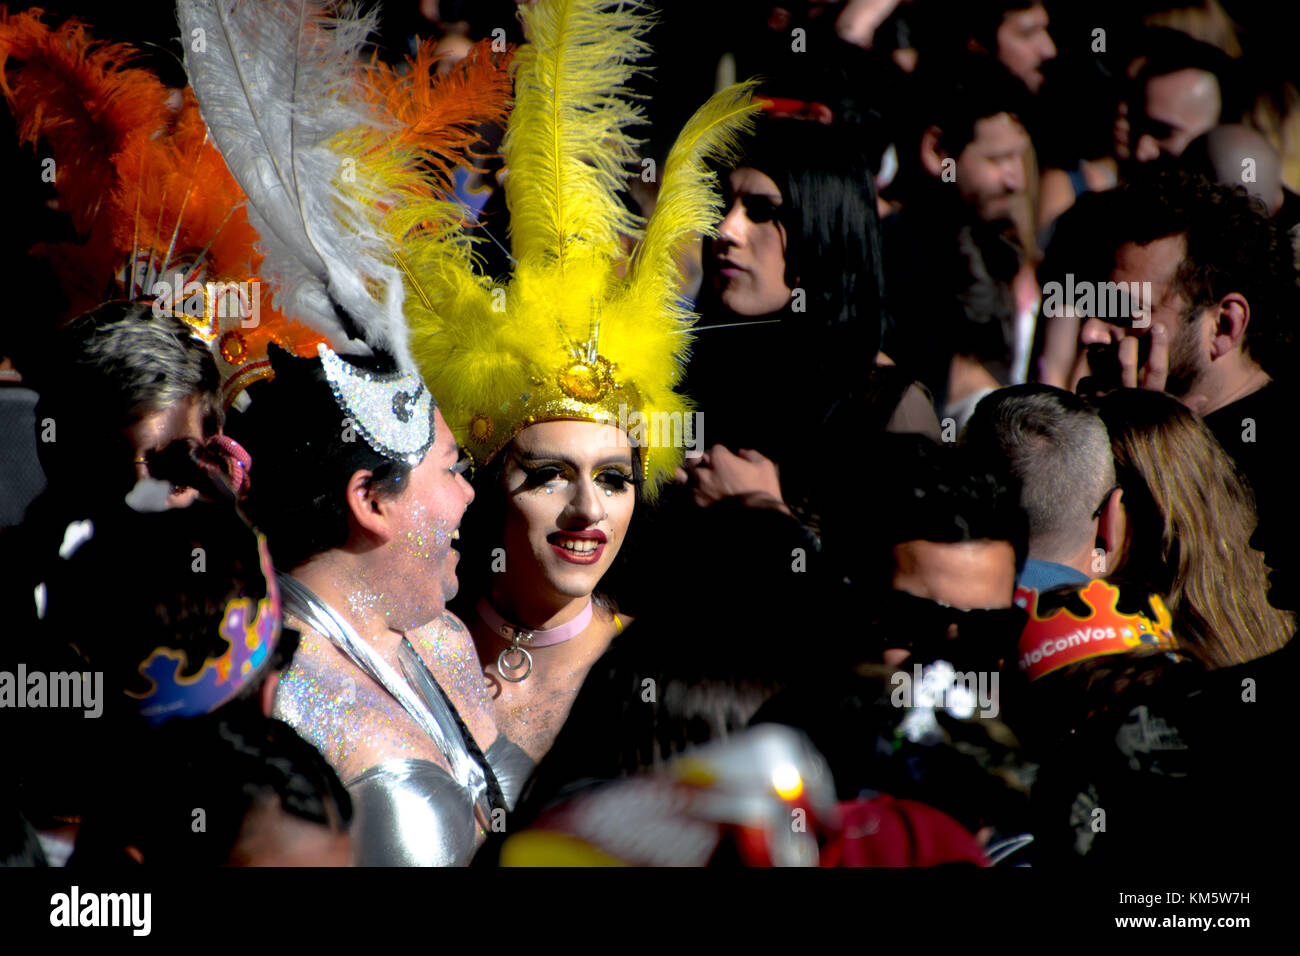 November 18, 2017 - Buenos Aires, Ciudad AutÃ³noma de Buenos Aires, Argentina - Surrounded by a sea of people, two fabulous, feathered queens smile at supporters. Thousands of pride supporters marched from Plaza de Mayo to Congreso de la NaciÃ³n during the city's 26th annual Marcha del Orgullo Gay Credit: Jason Sheil/SOPA/ZUMA Wire/Alamy Live News Stock Photo